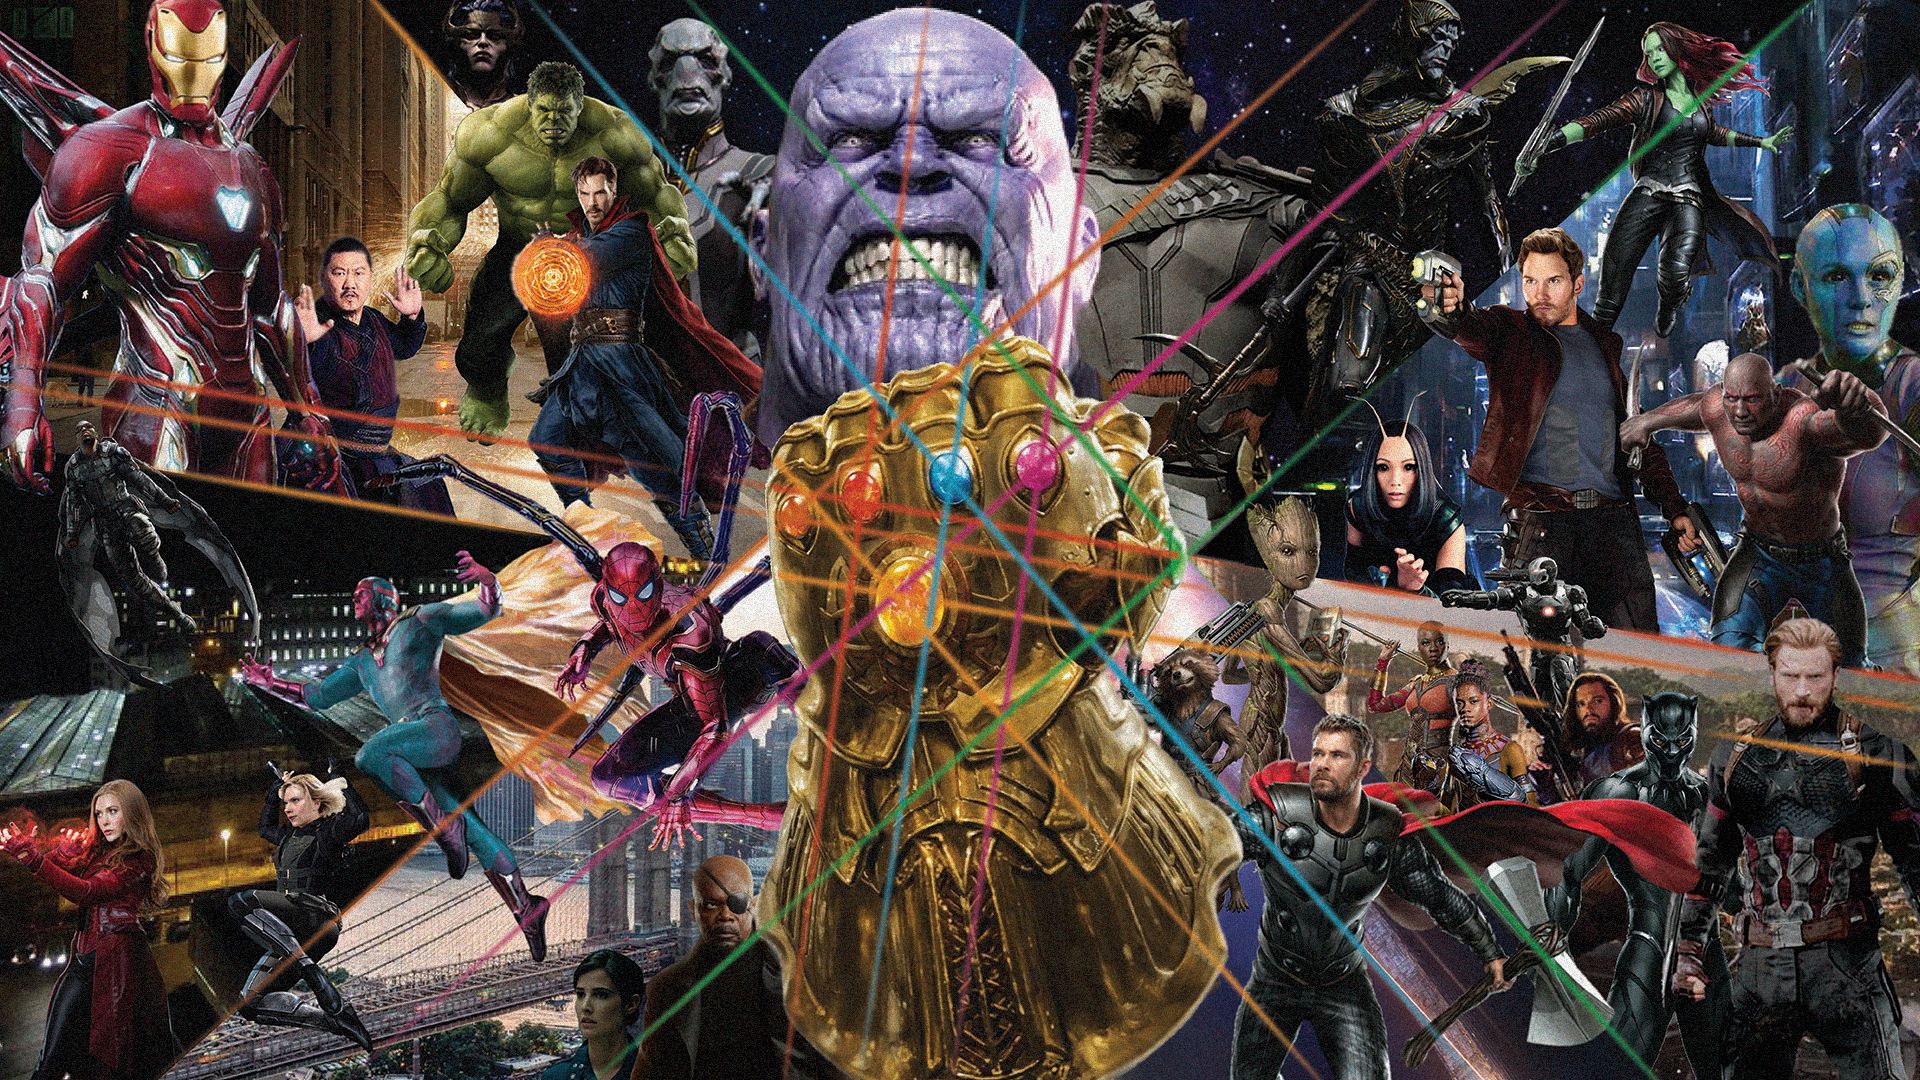 Made this to commemorate my 6th Cake Day. Replicated the Infinity Gauntlet Cover with the MCU version